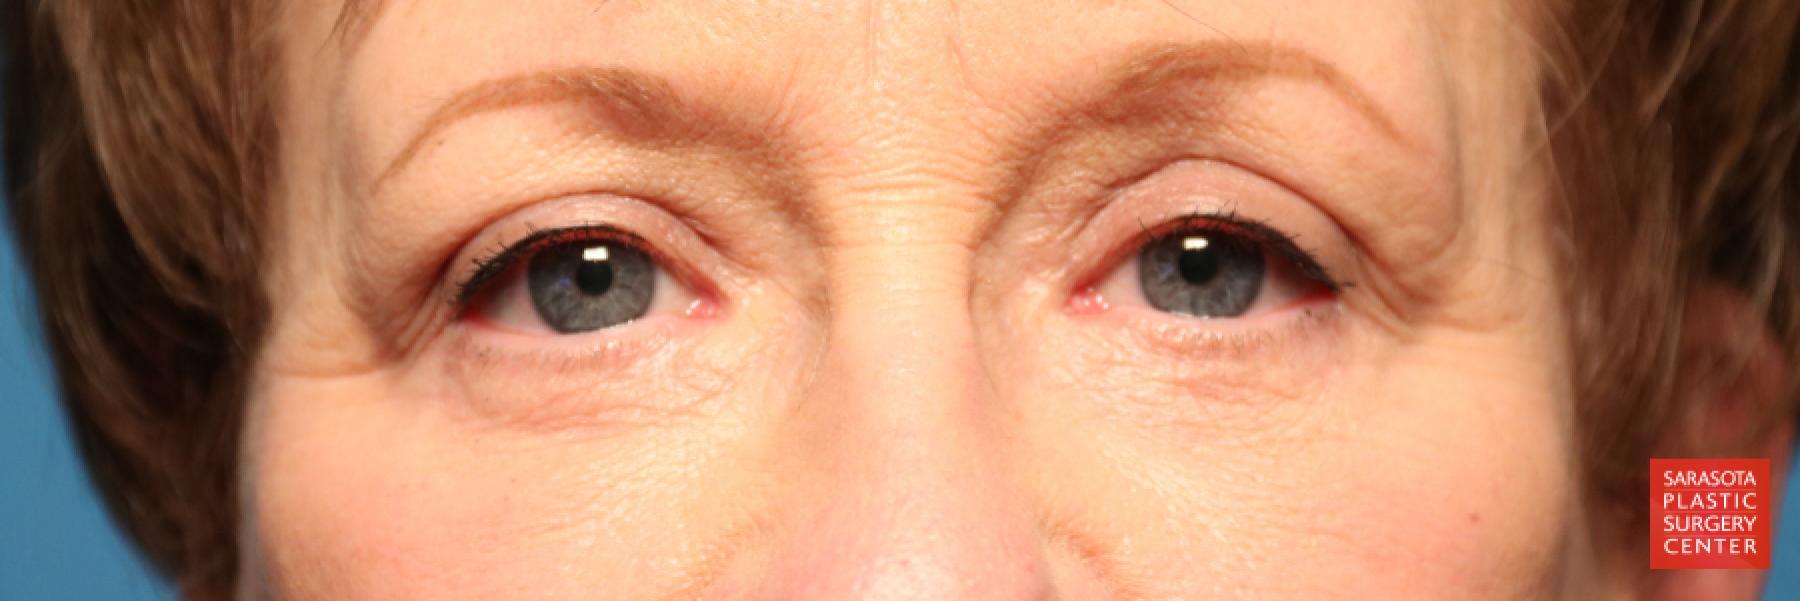 Eyelid Lift: Patient 20 - After 1